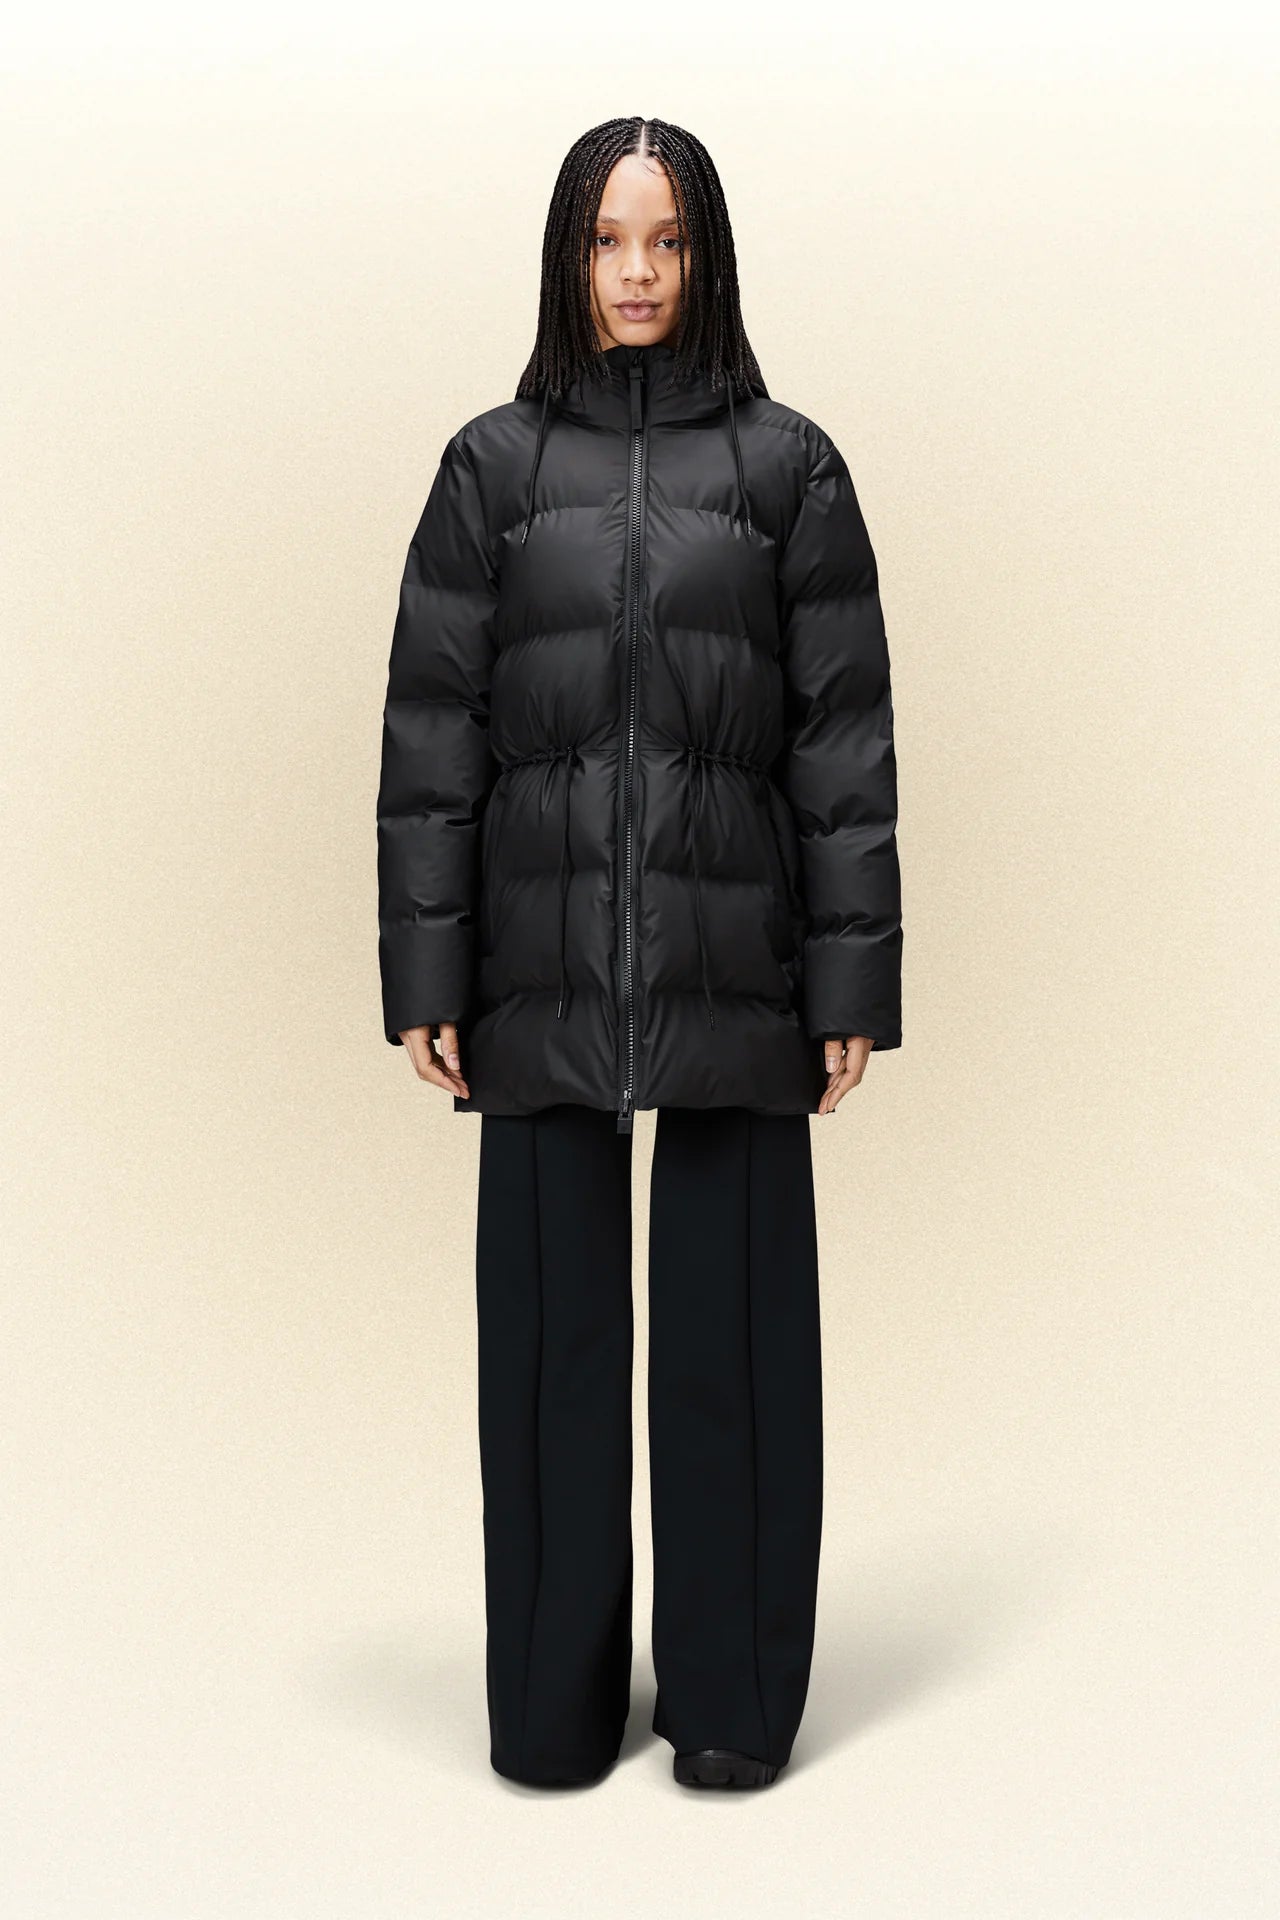 A woman wearing the Rains W Alta Puffer Parka - Black and wide leg pants.